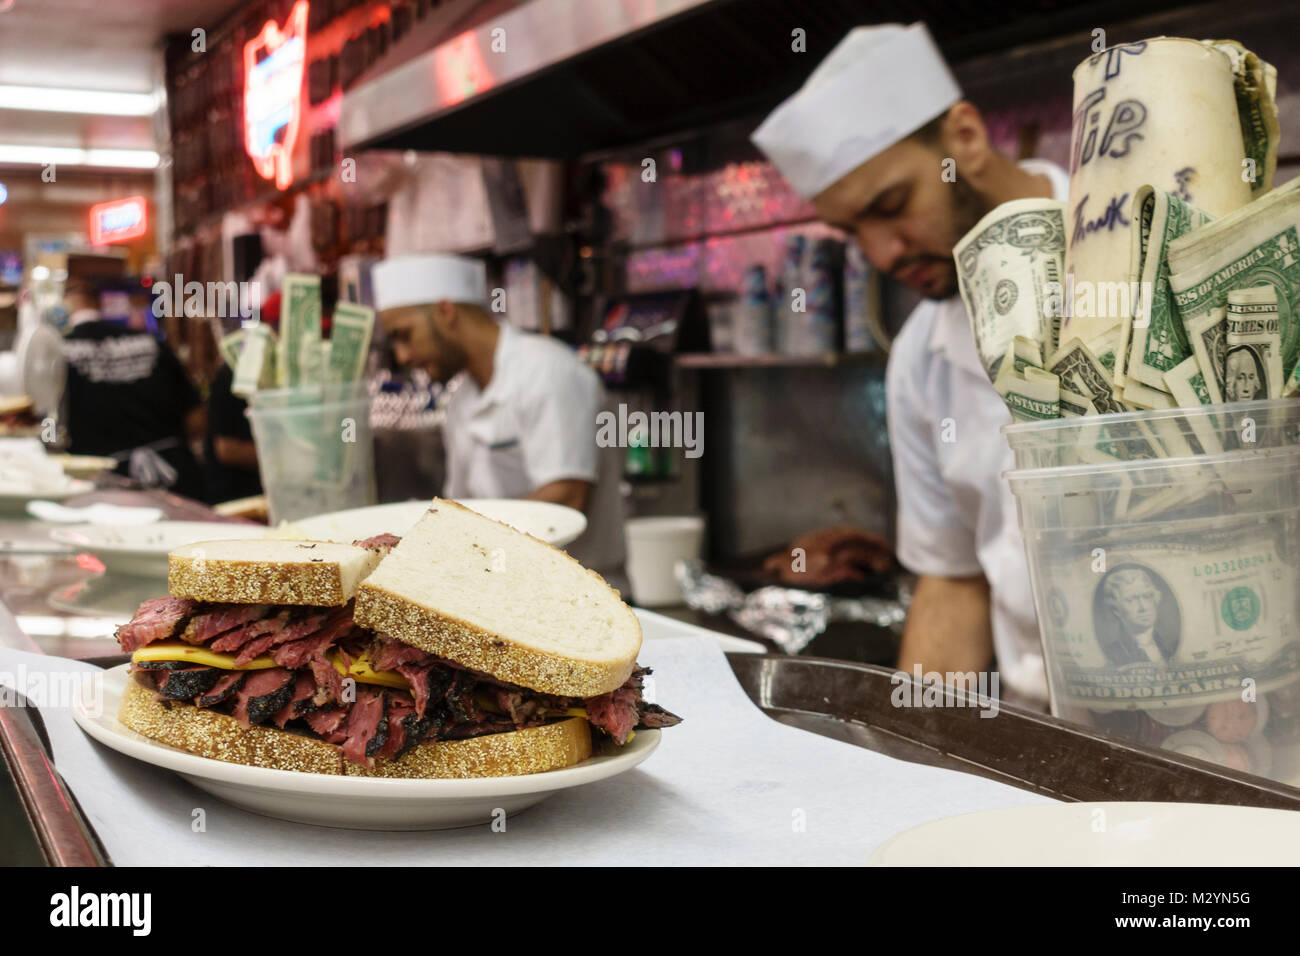 Hard-working staff making pastrami sandwiches in the open kitchen at Katz's Delicatessen, a famous New York City restaurant. Tips in cup on counter. Stock Photo